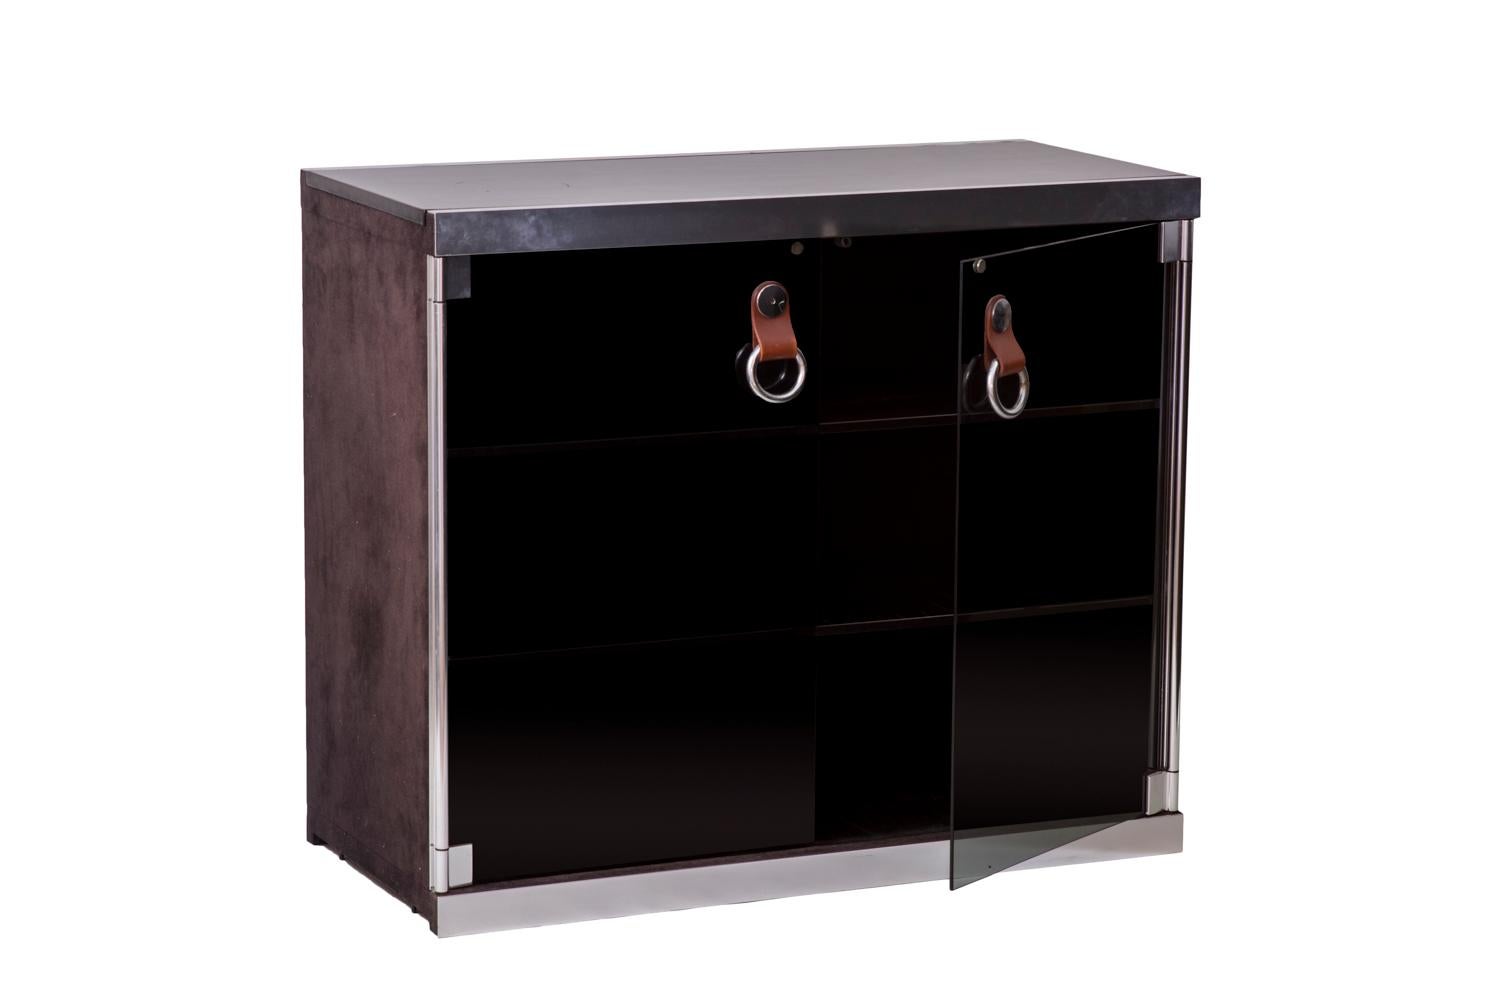 Guido Faleschini for Hermès, attributed to.
Modular cabinet opening by two smoked glass door leaves thanks to brown leather handles, on two compartments in black lacquered wood with two shelves in each one.
Structure and mounts in chromed metal.